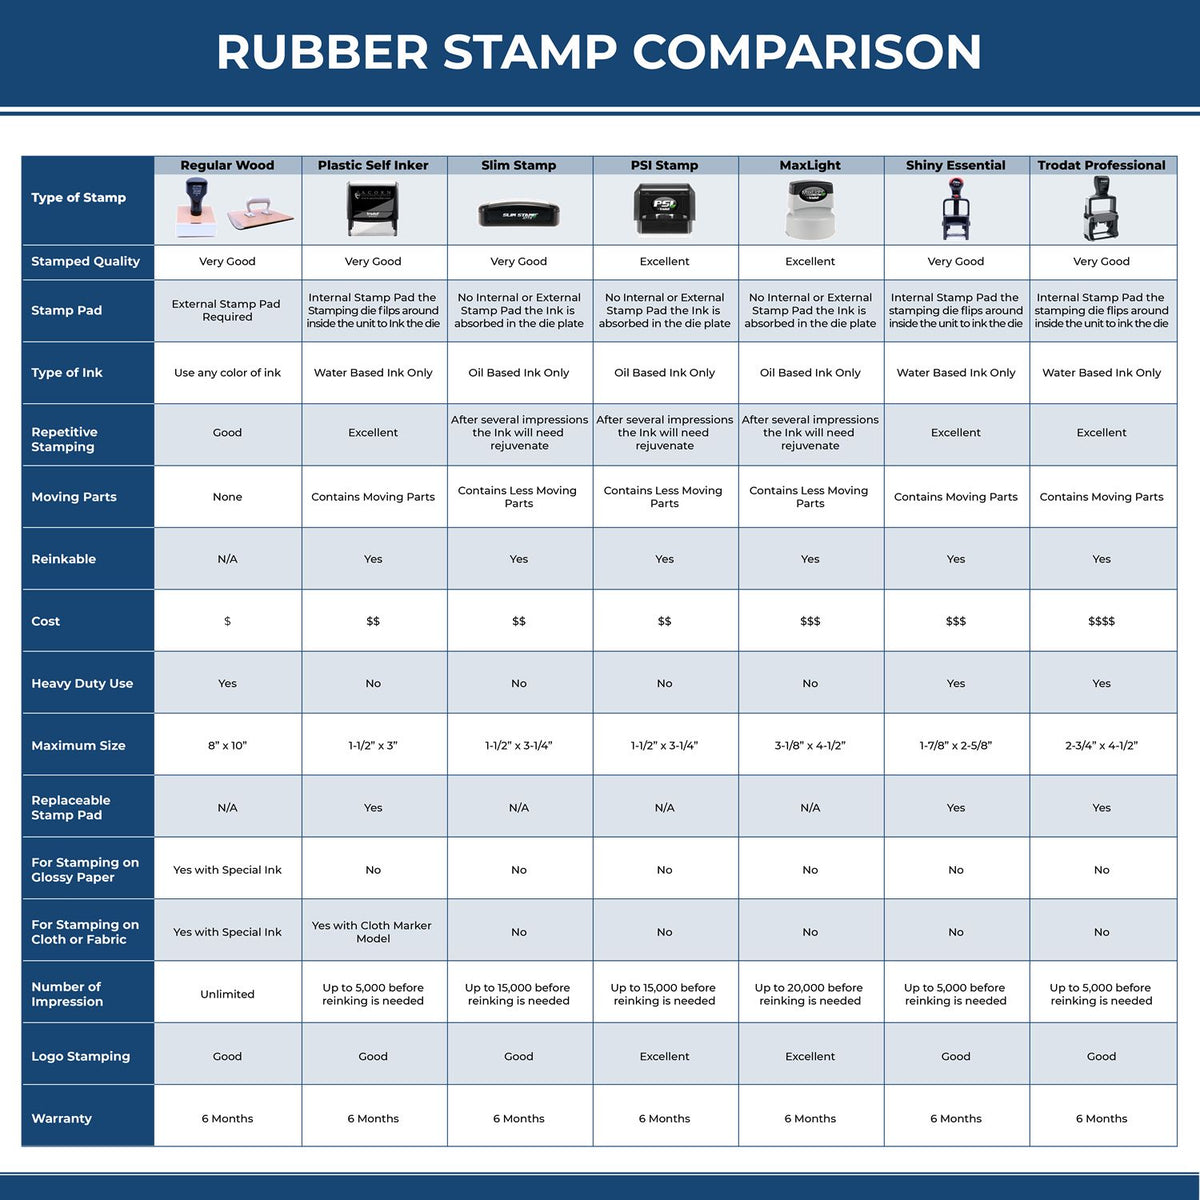 A comparison chart for the different types of mount models available for the Wooden Handle New York State Seal Notary Public Stamp.